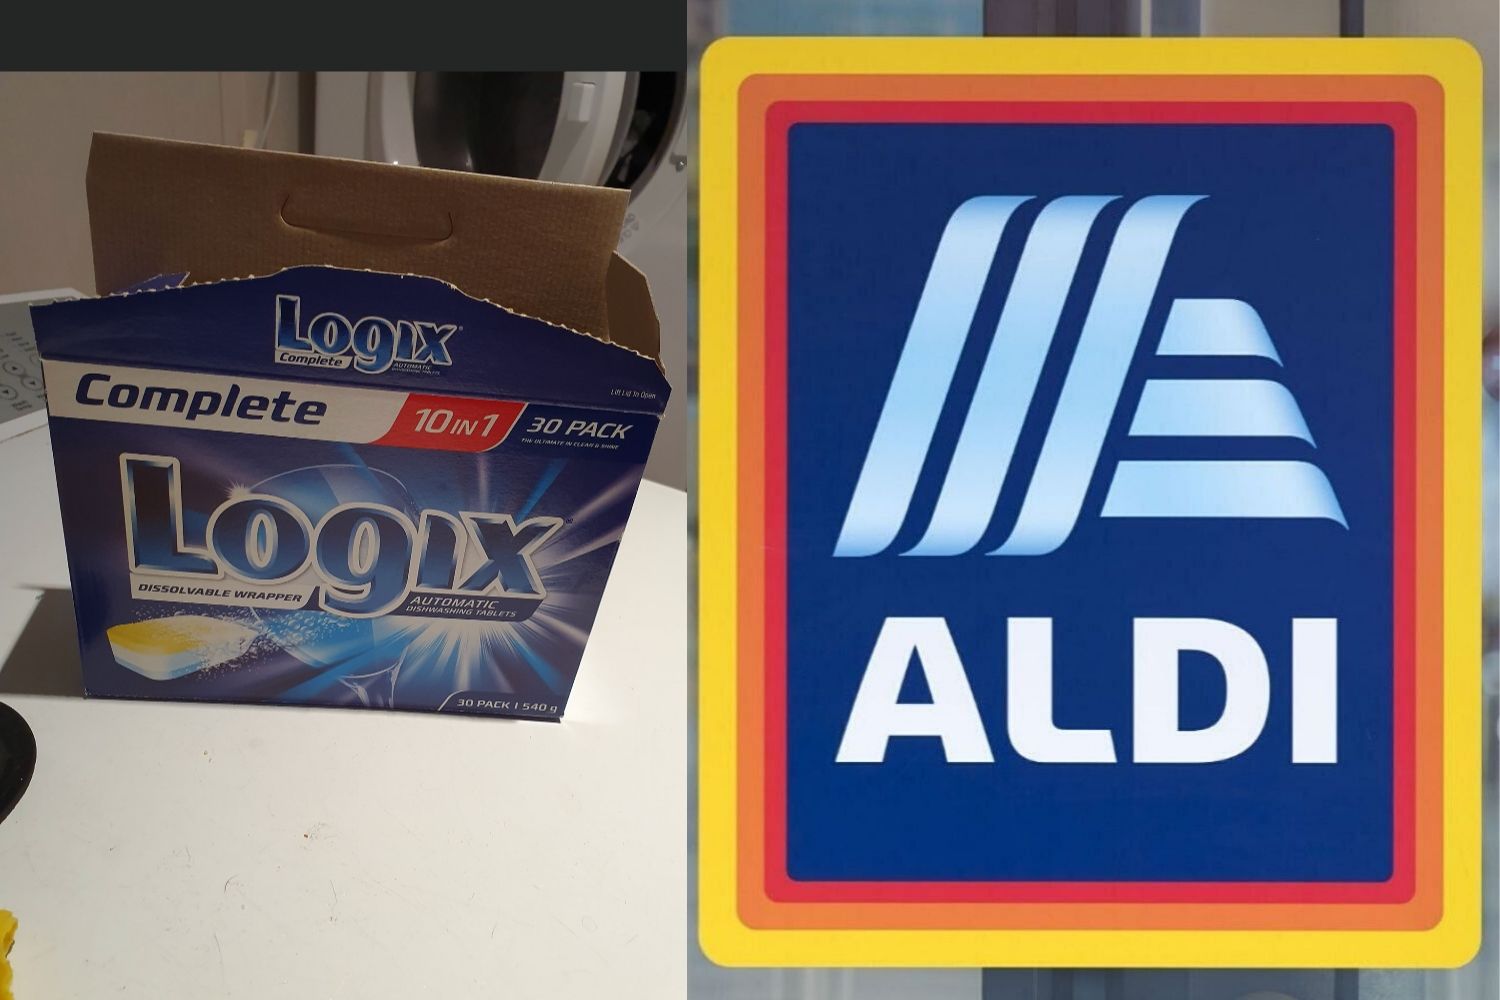 New! Mum’s latest cleaning hack using 14 cent Aldi dishwashing tablets will blow your mind!